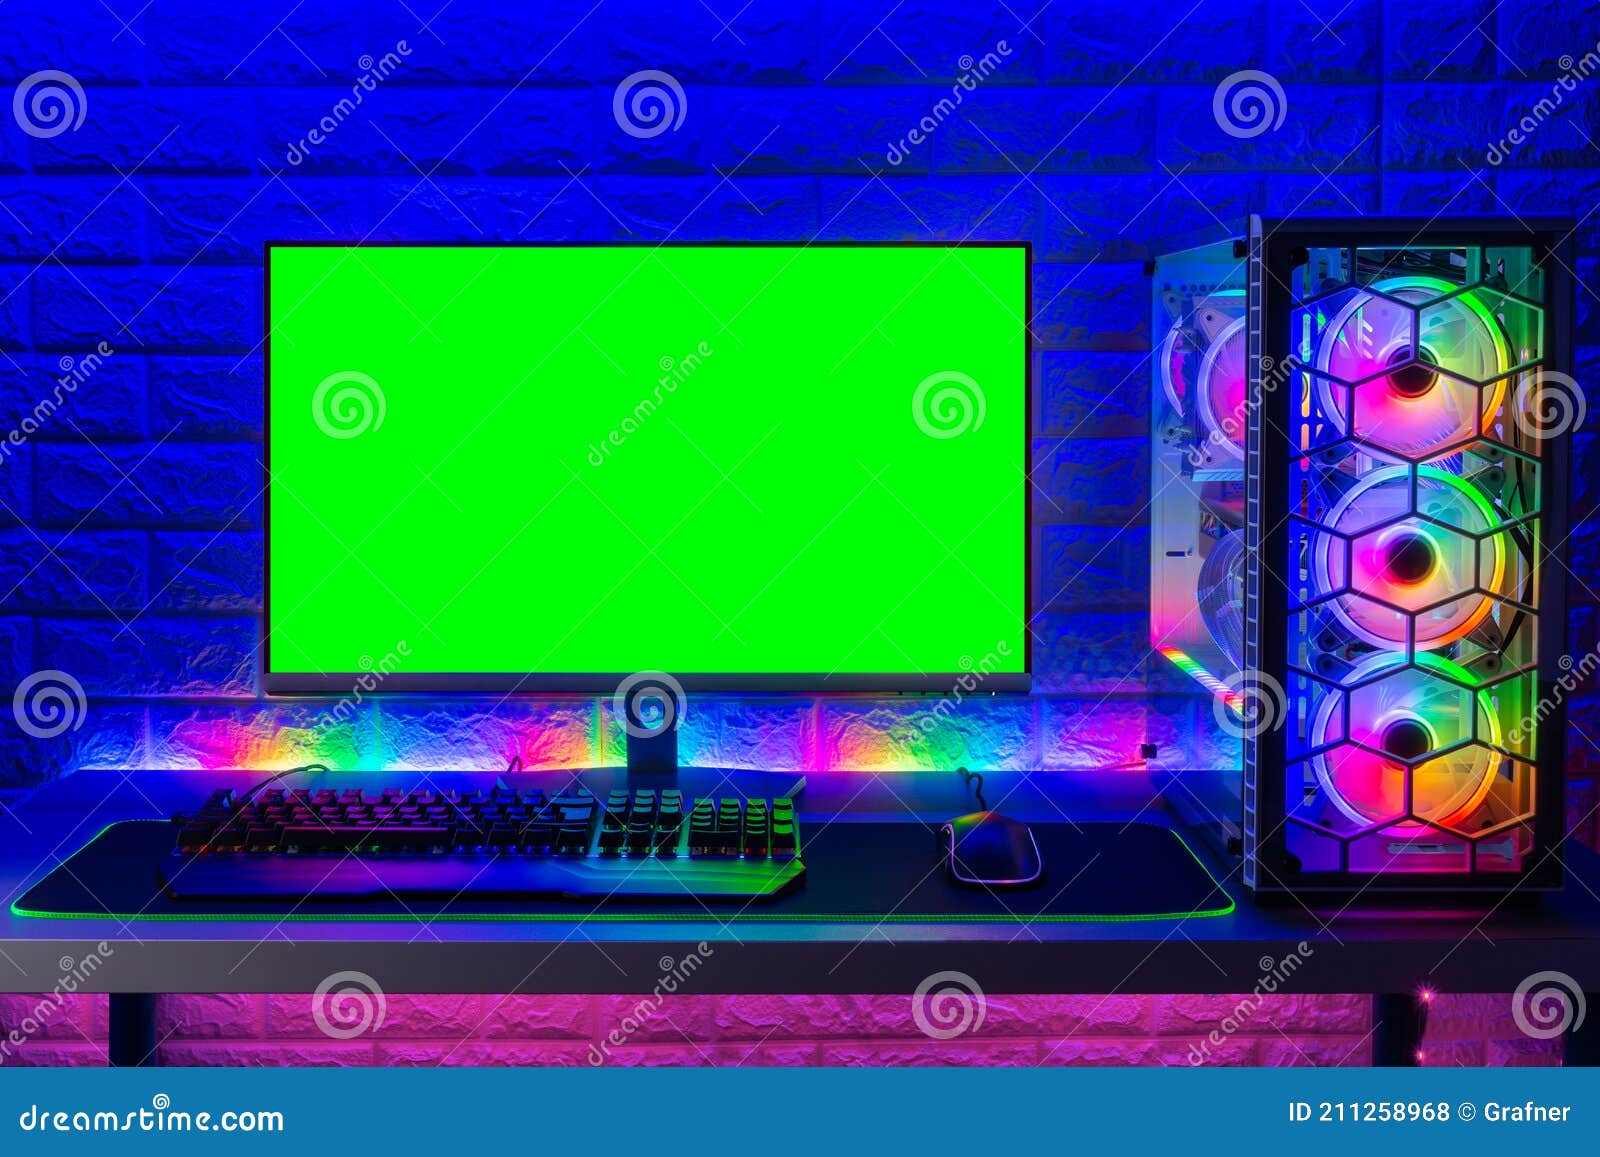 colorful bright illuminated rgb gaming pc with keyboard mouse monitor with green screen copy space front of led light brick stone